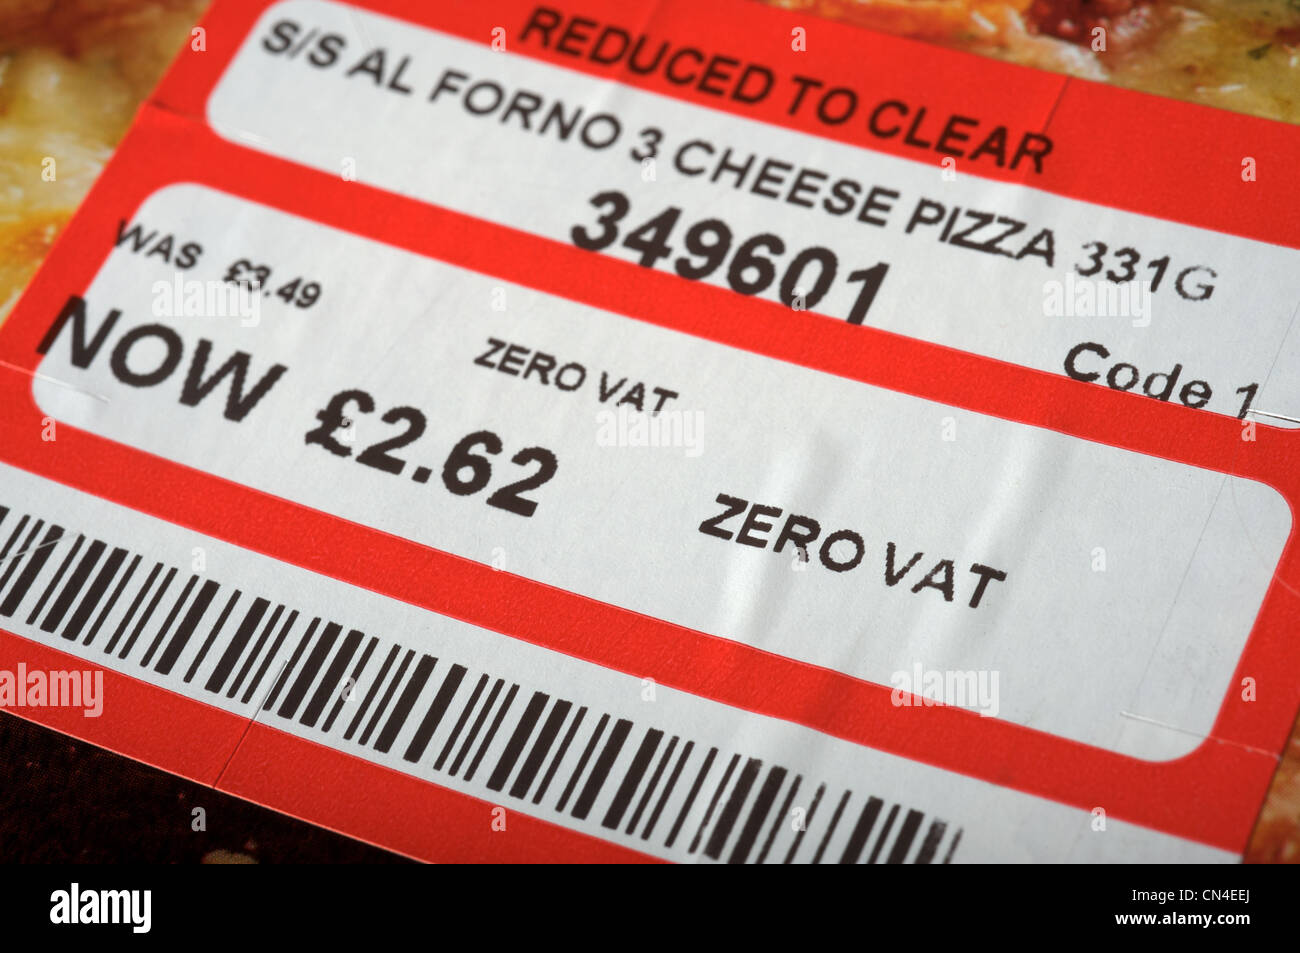 Cheese pizza price label showing zero rate of tax (UK) Stock Photo